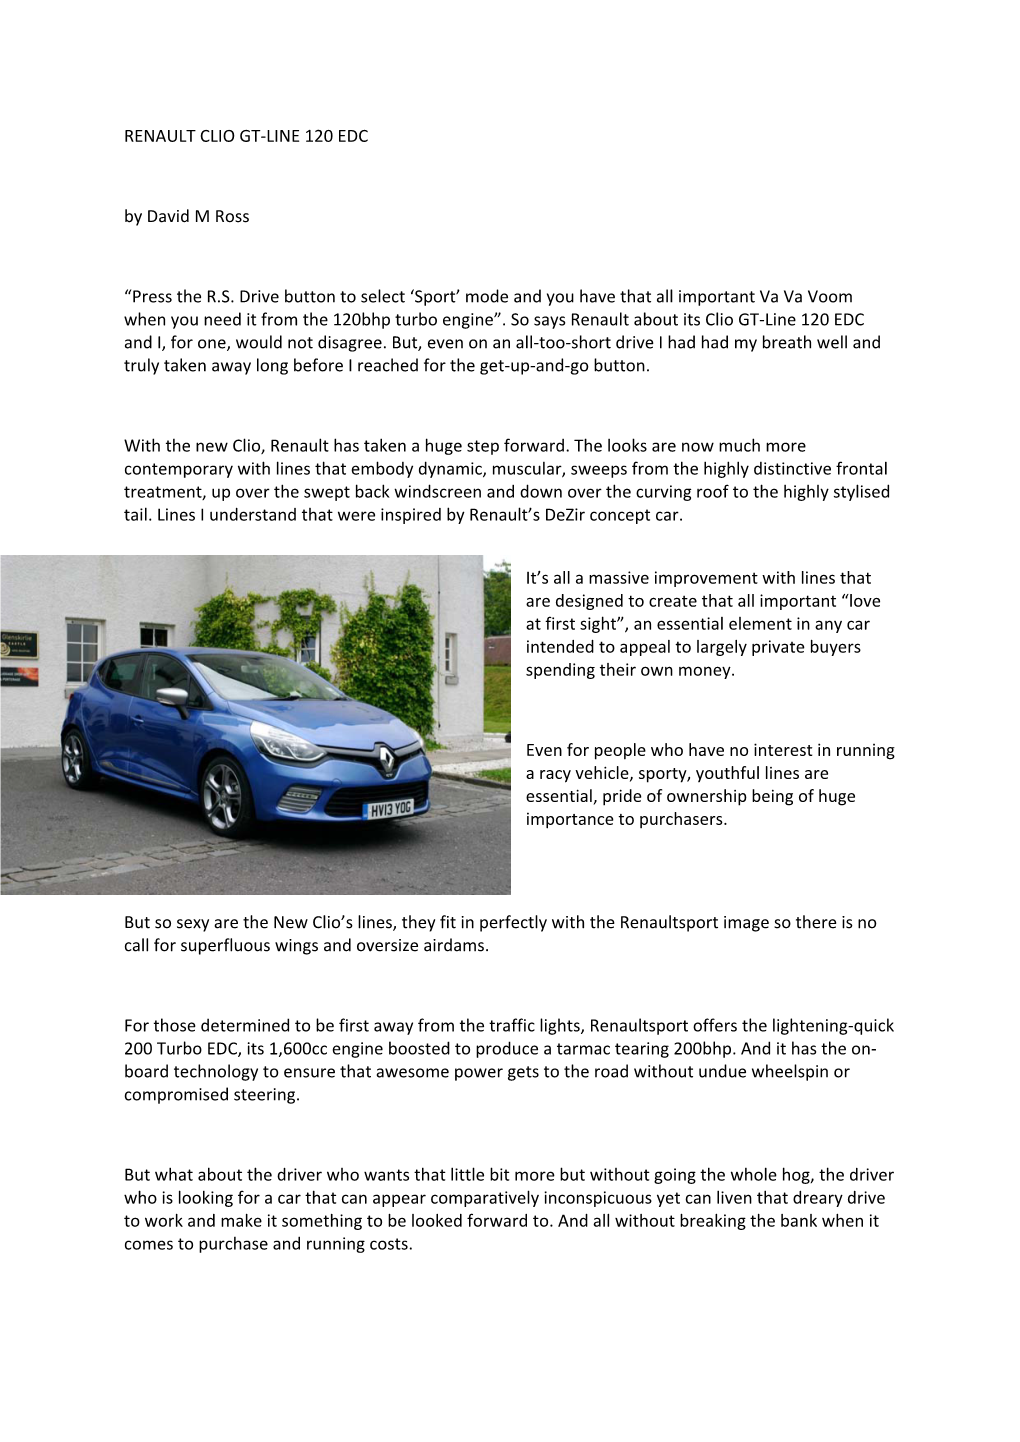 RENAULT CLIO GT-LINE 120 EDC by David M Ross “Press the R.S. Drive Button to Select 'Sport' Mode and You Have That All Im